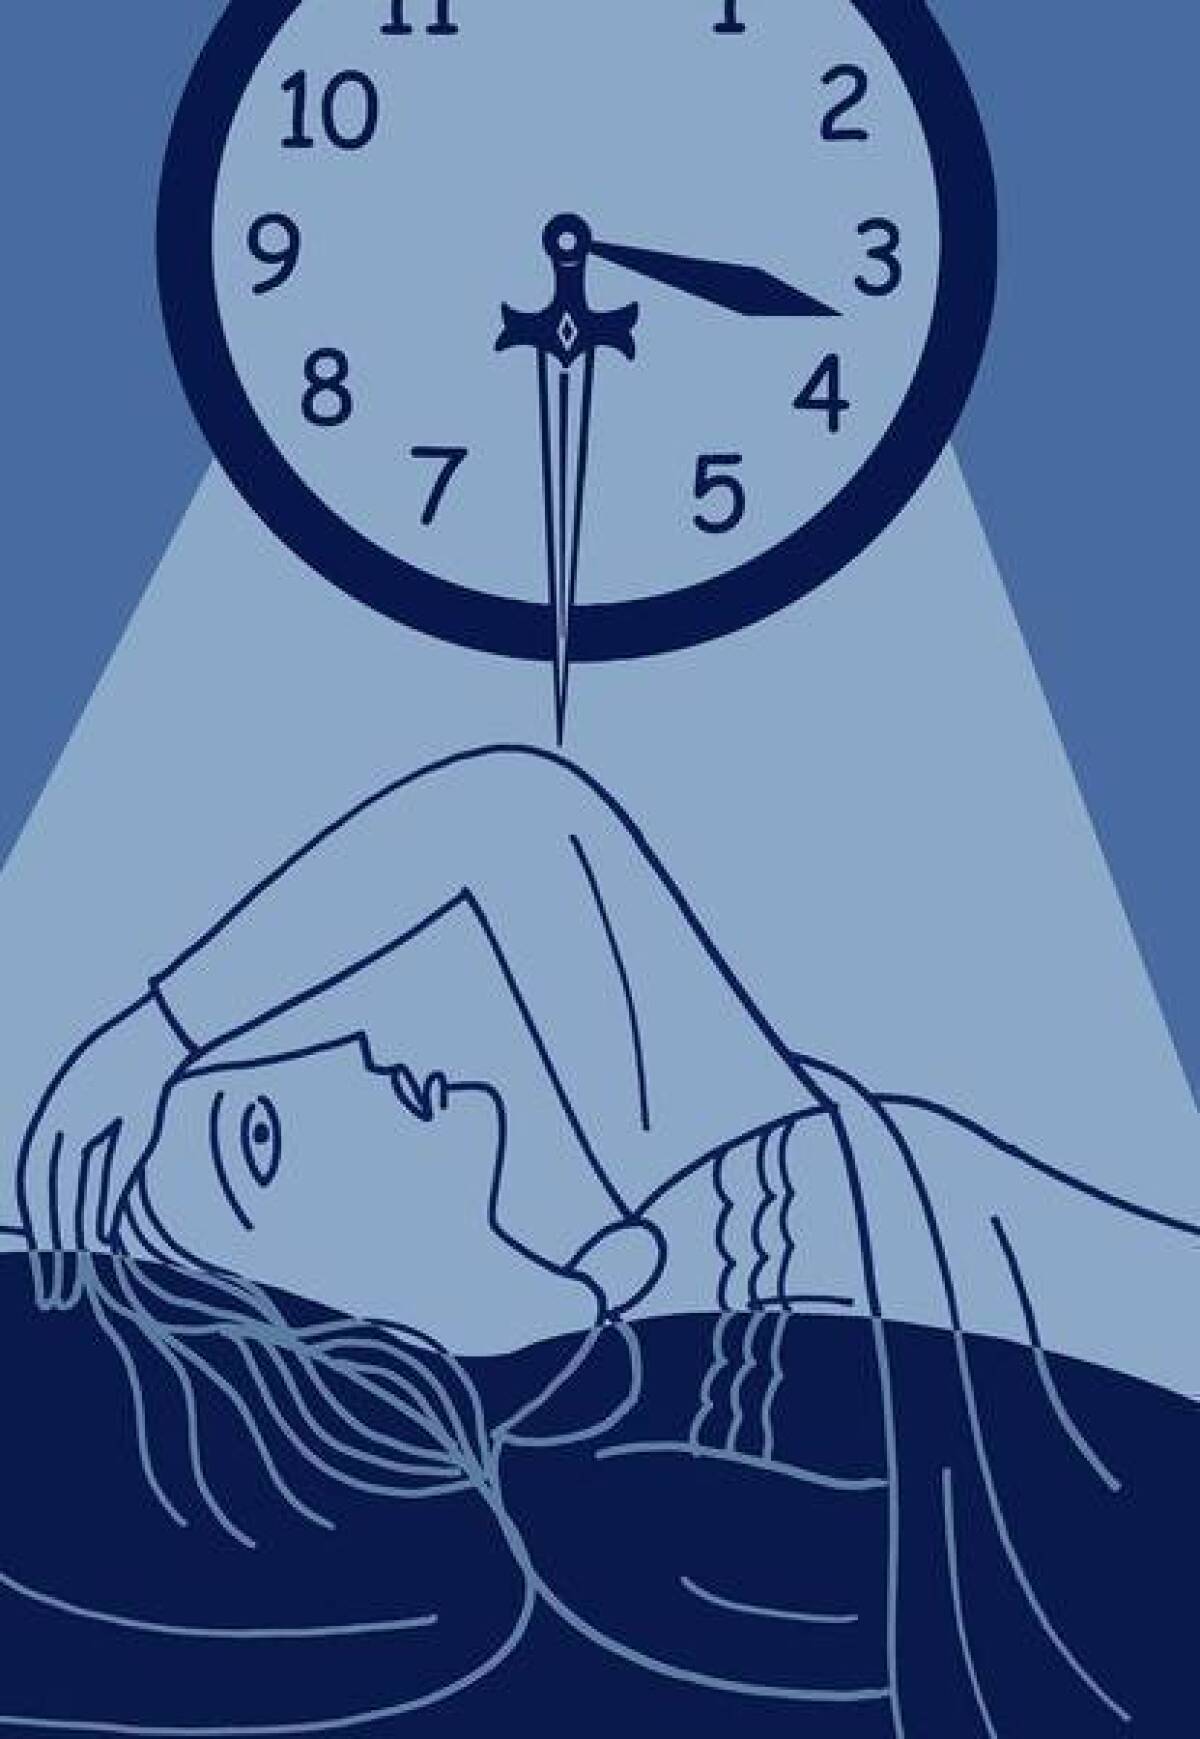 Sleep helps us strengthen our memory and synthesize information, says neuroscientist Penelope Lewis.